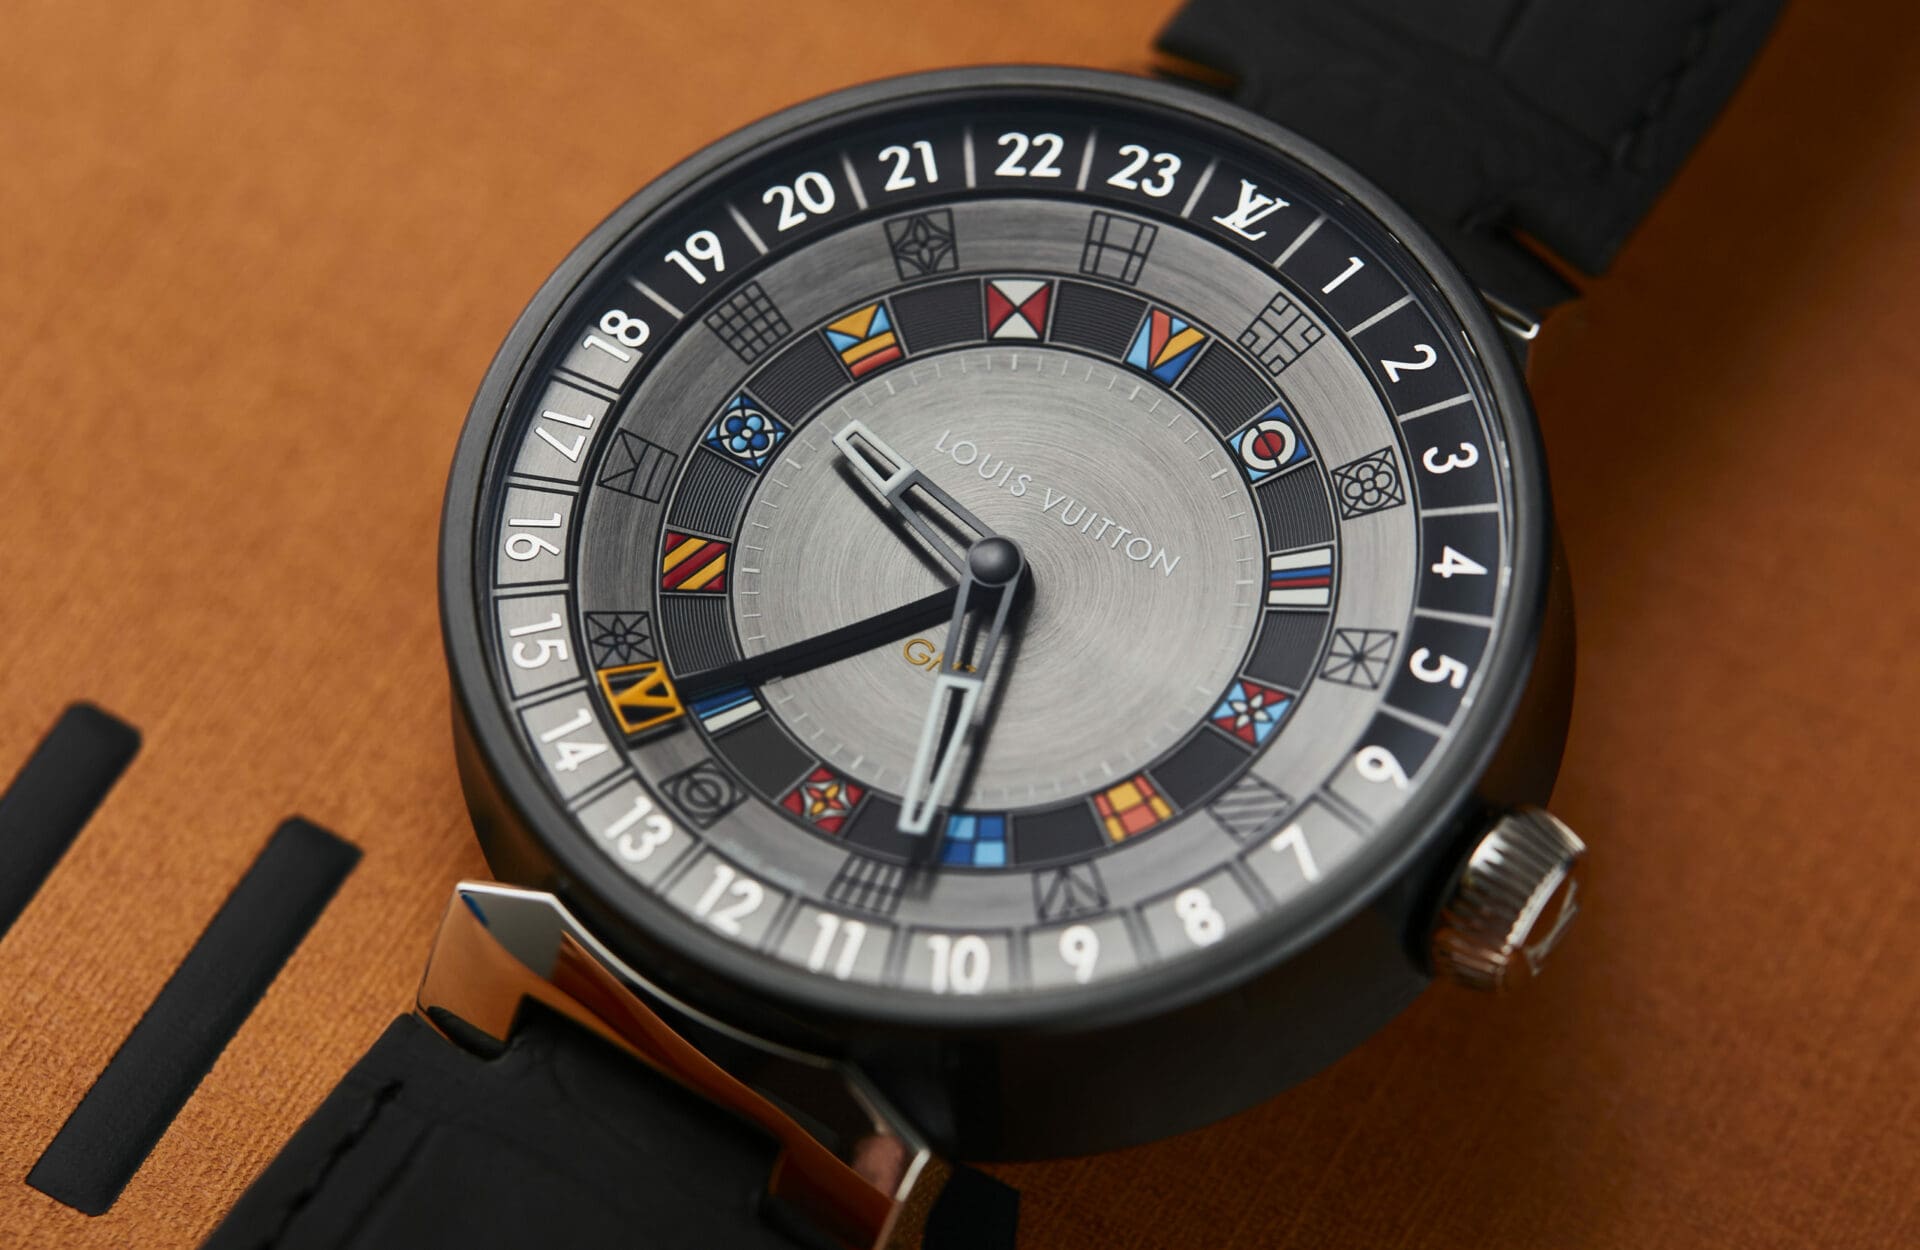 VIDEO: The Louis Vuitton Tambour Moon Dual Time reflects the brand’s globetrotting spirit